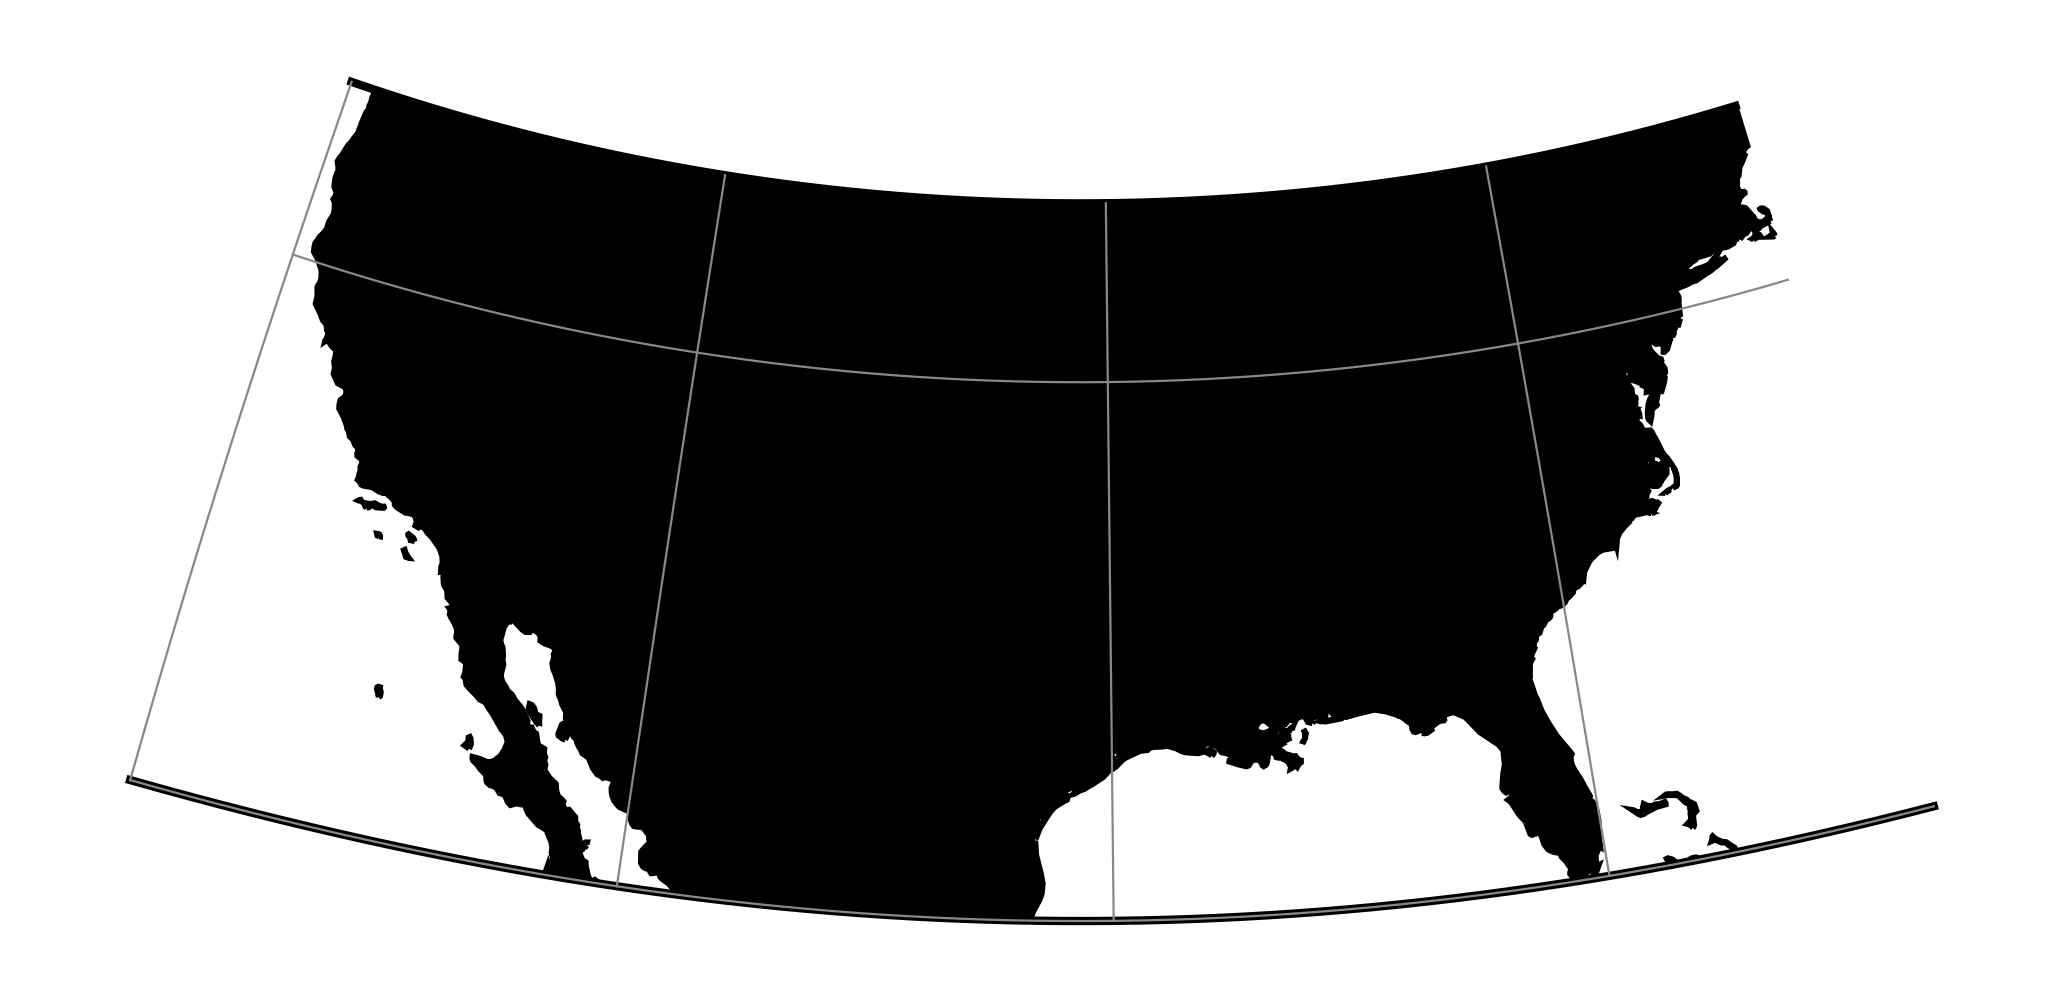 Modified Stereographic of 48 U.S.